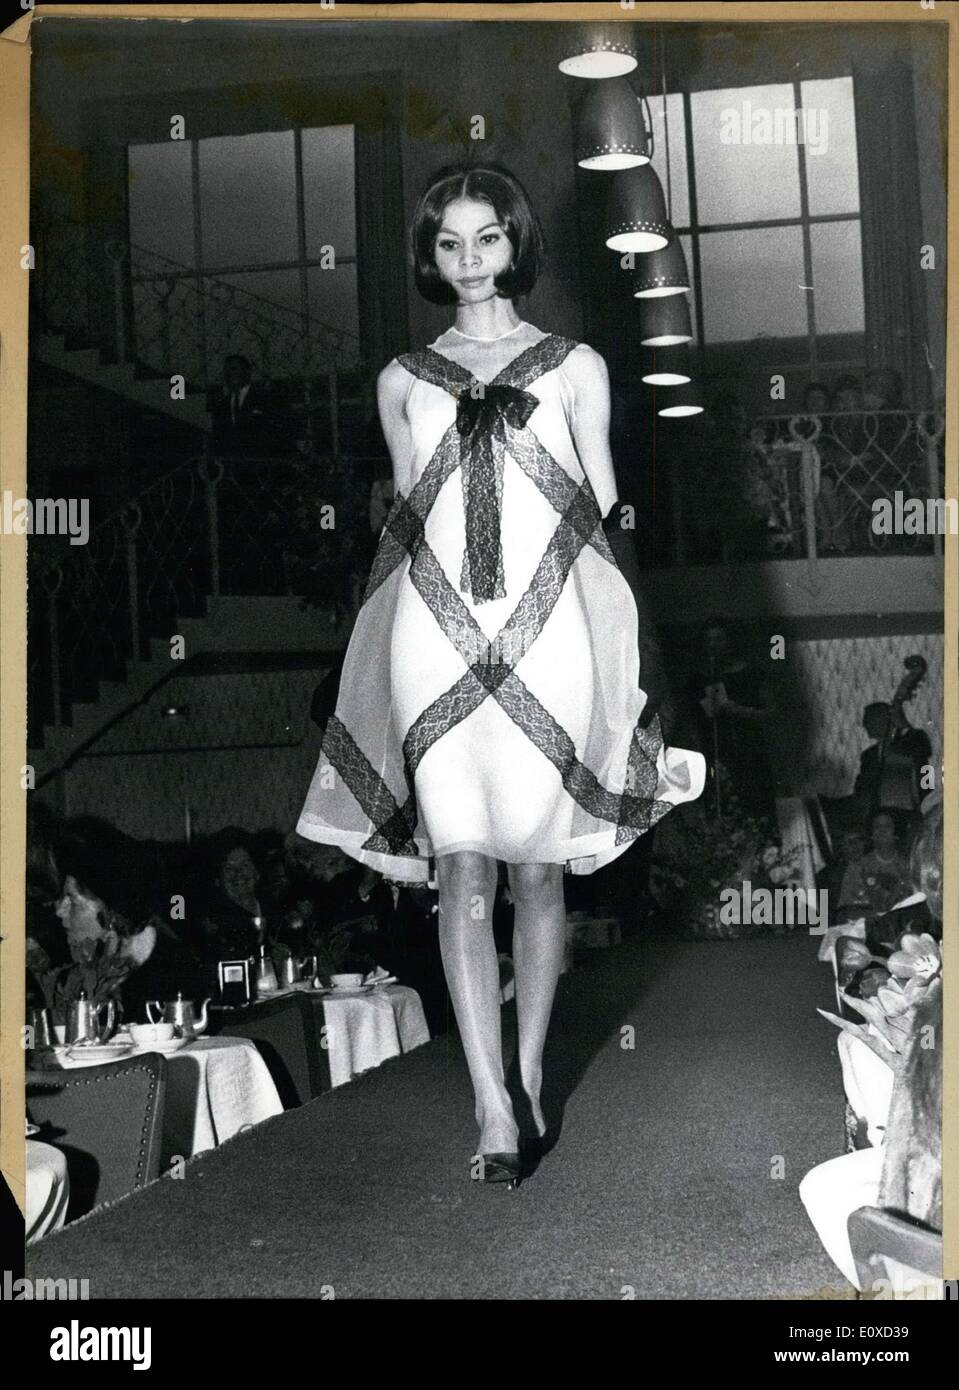 Apr. 30, 1966 - A special event for the women of Munich occurred on April 4 in the hotel ''Bayerischer Hof.'' Gr?s House, from Paris, presented its complete spring and summer collection for 1966. It was the first time that Mademoiselle Gr?s allowed her models to present in the country. The credit for this belongs to a Munich publisher. Gr?s House ranks among the most important houses of the Haute Couture world, even though only insiders know of it Stock Photo